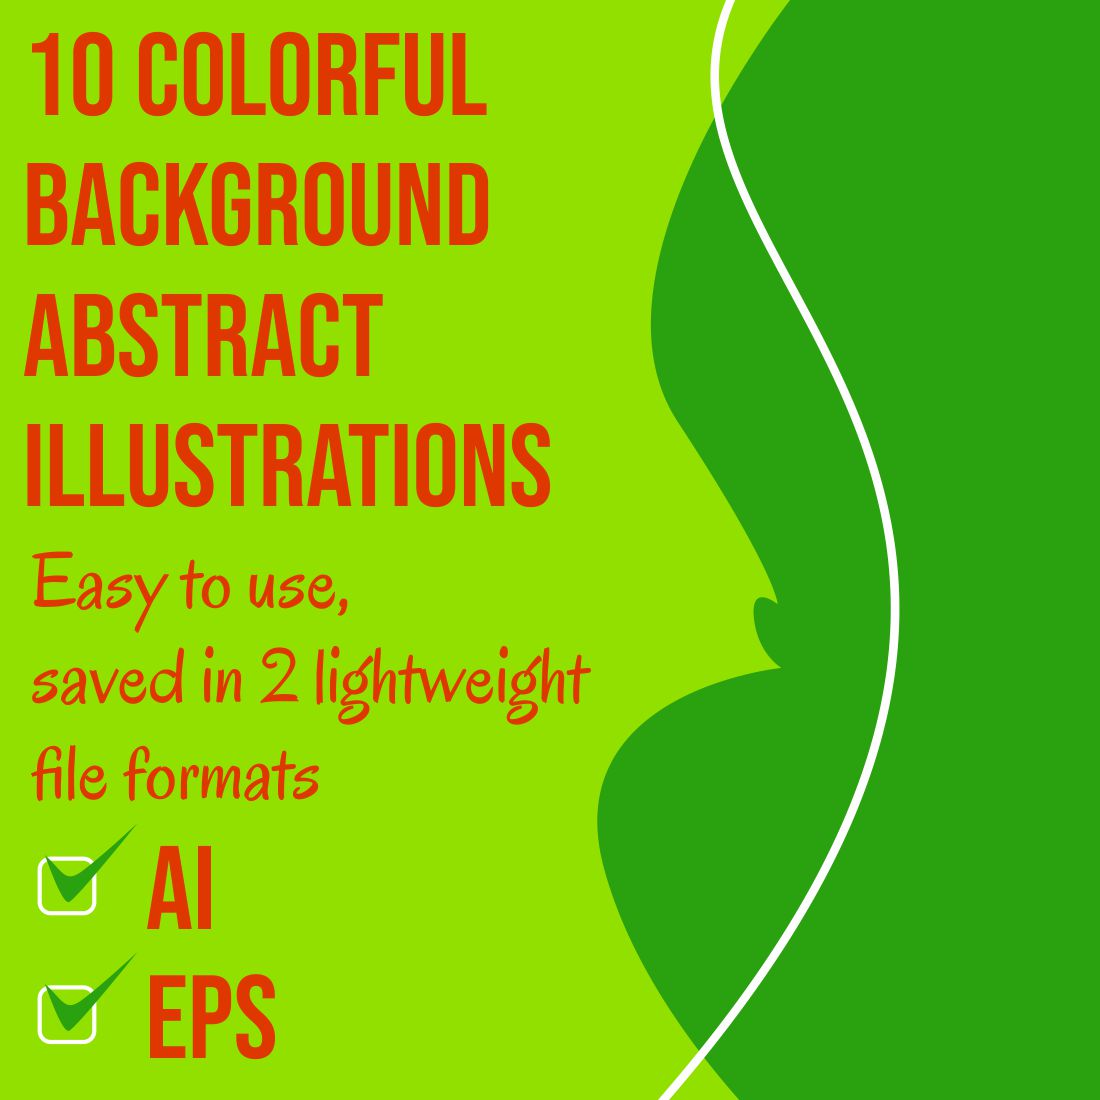 10 Colorful Background Abstract Illustrations main cover.